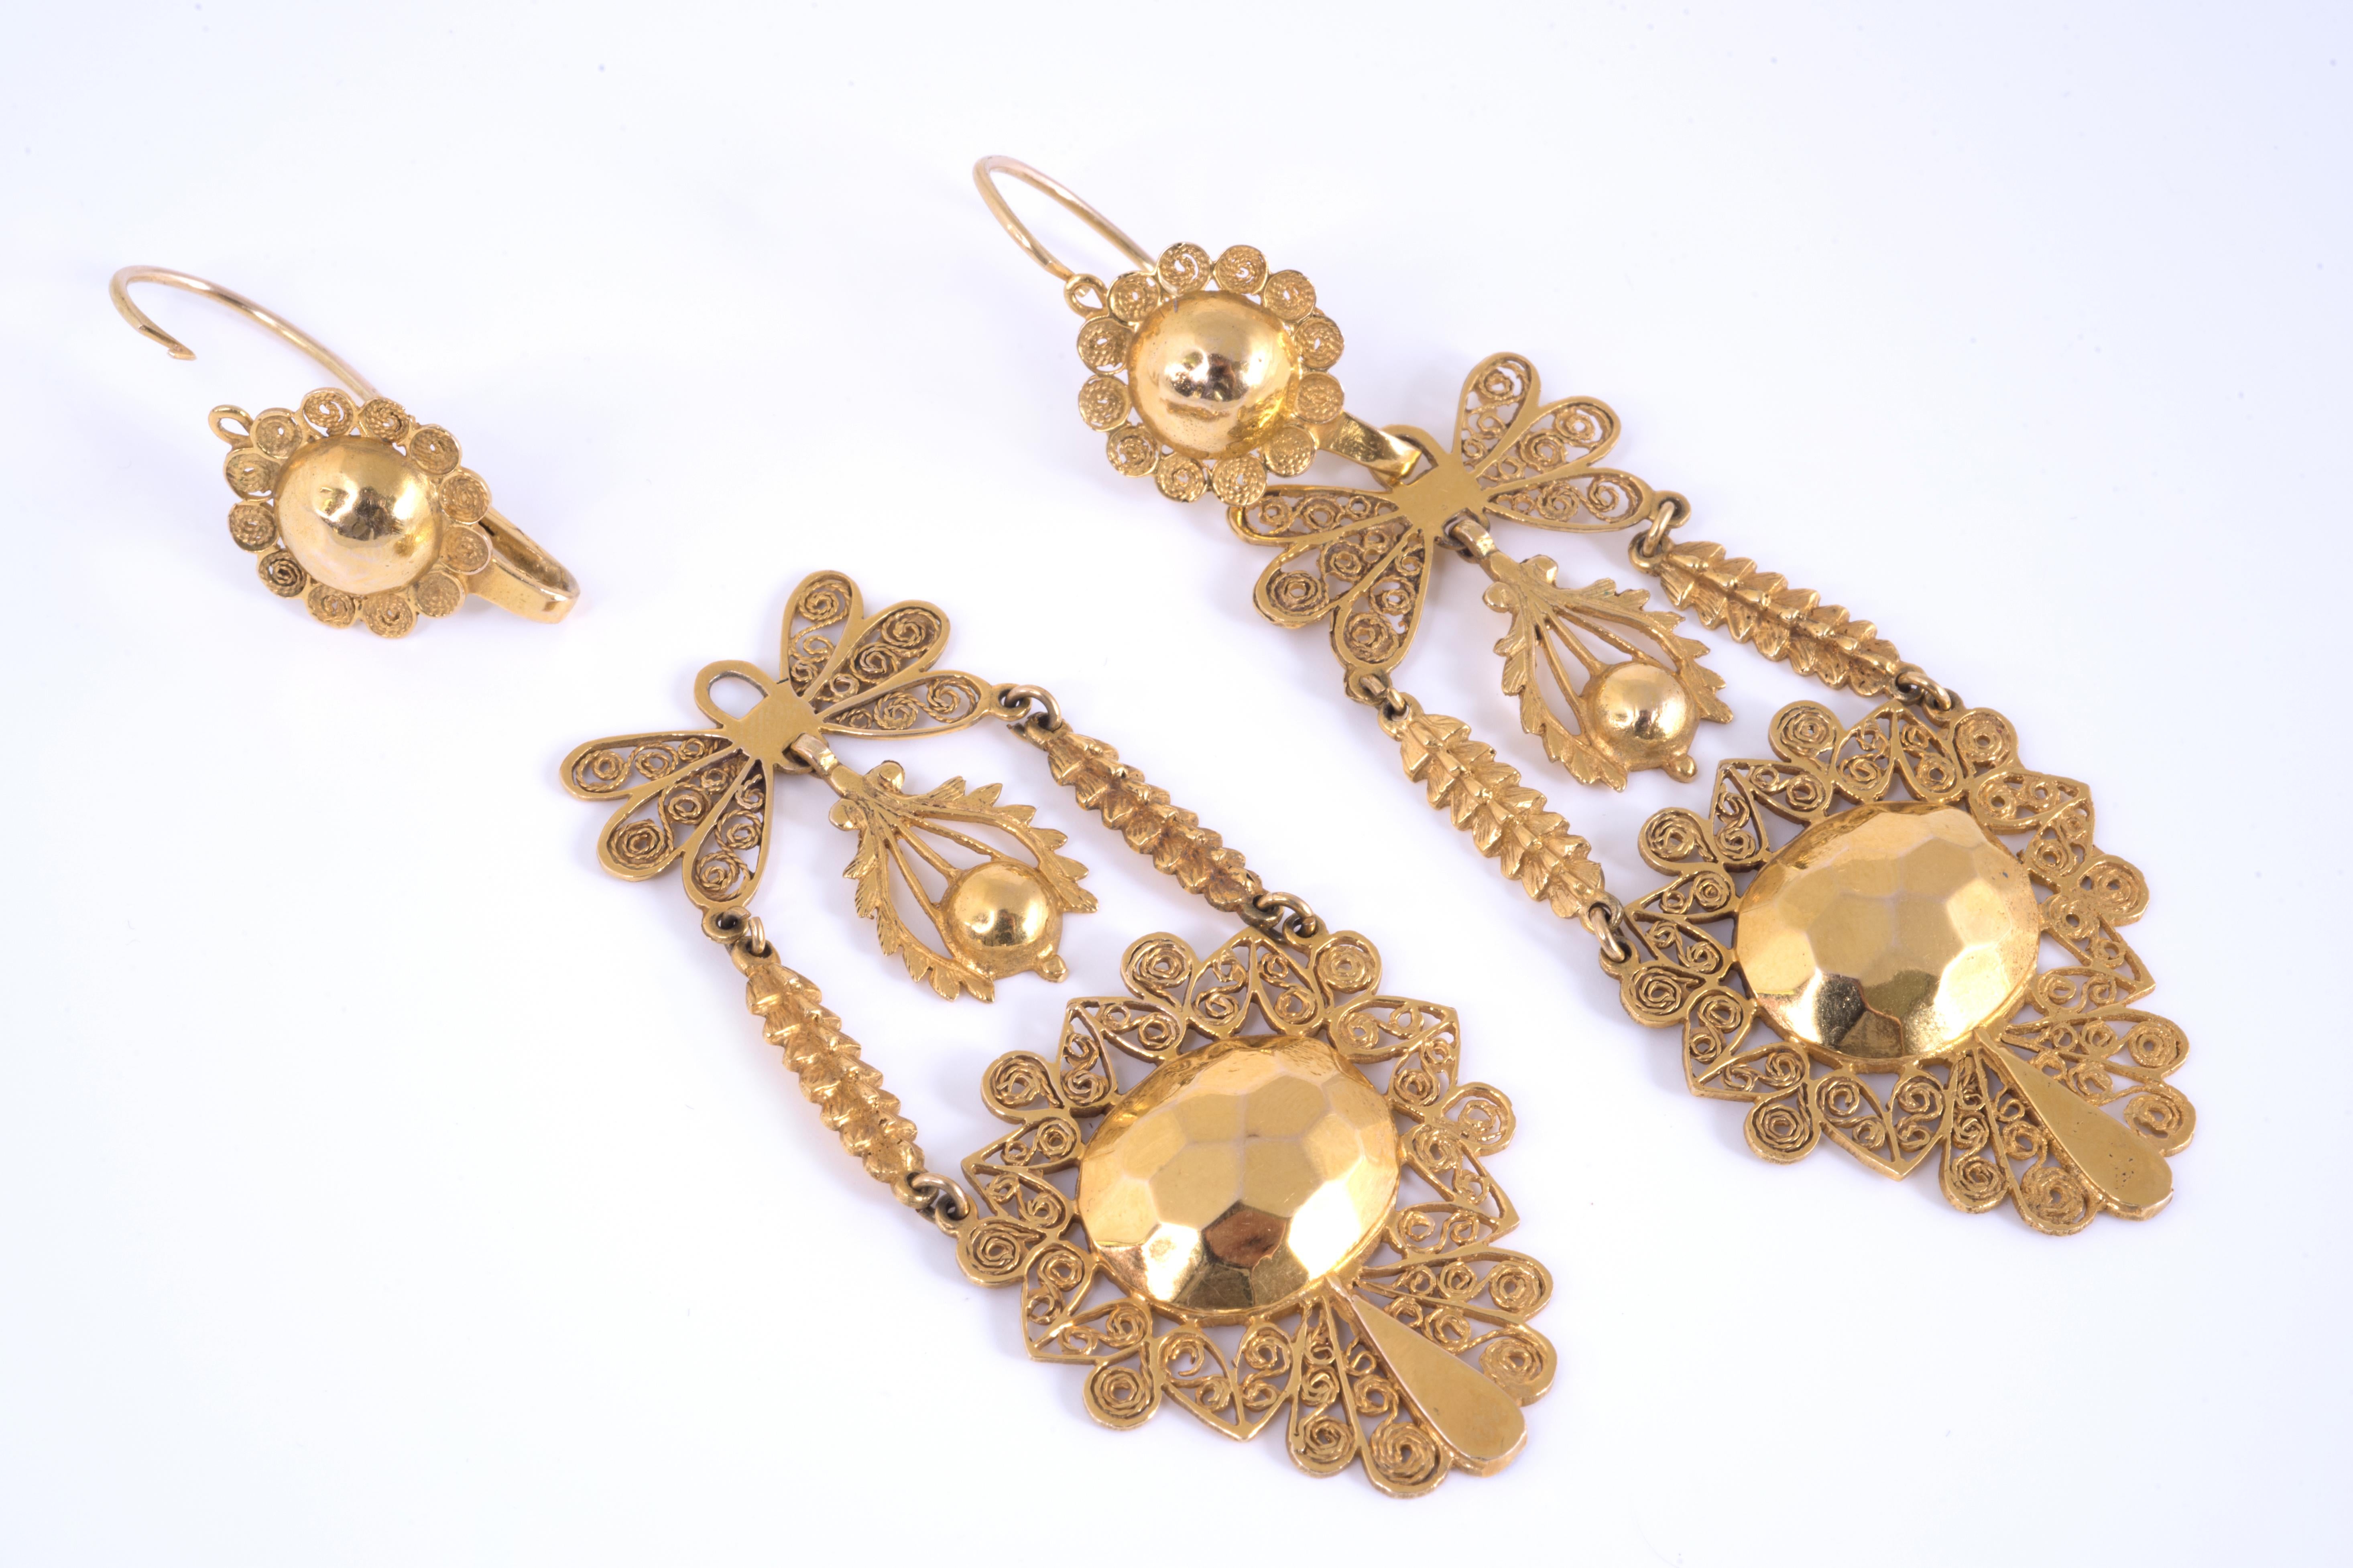 Antique 12 kt yellow gold filigree Sicilian earrings from the early 1800s (17th century)
descriptions: weight 23.80 grams are 9.5 cm long and 3 cm wide

